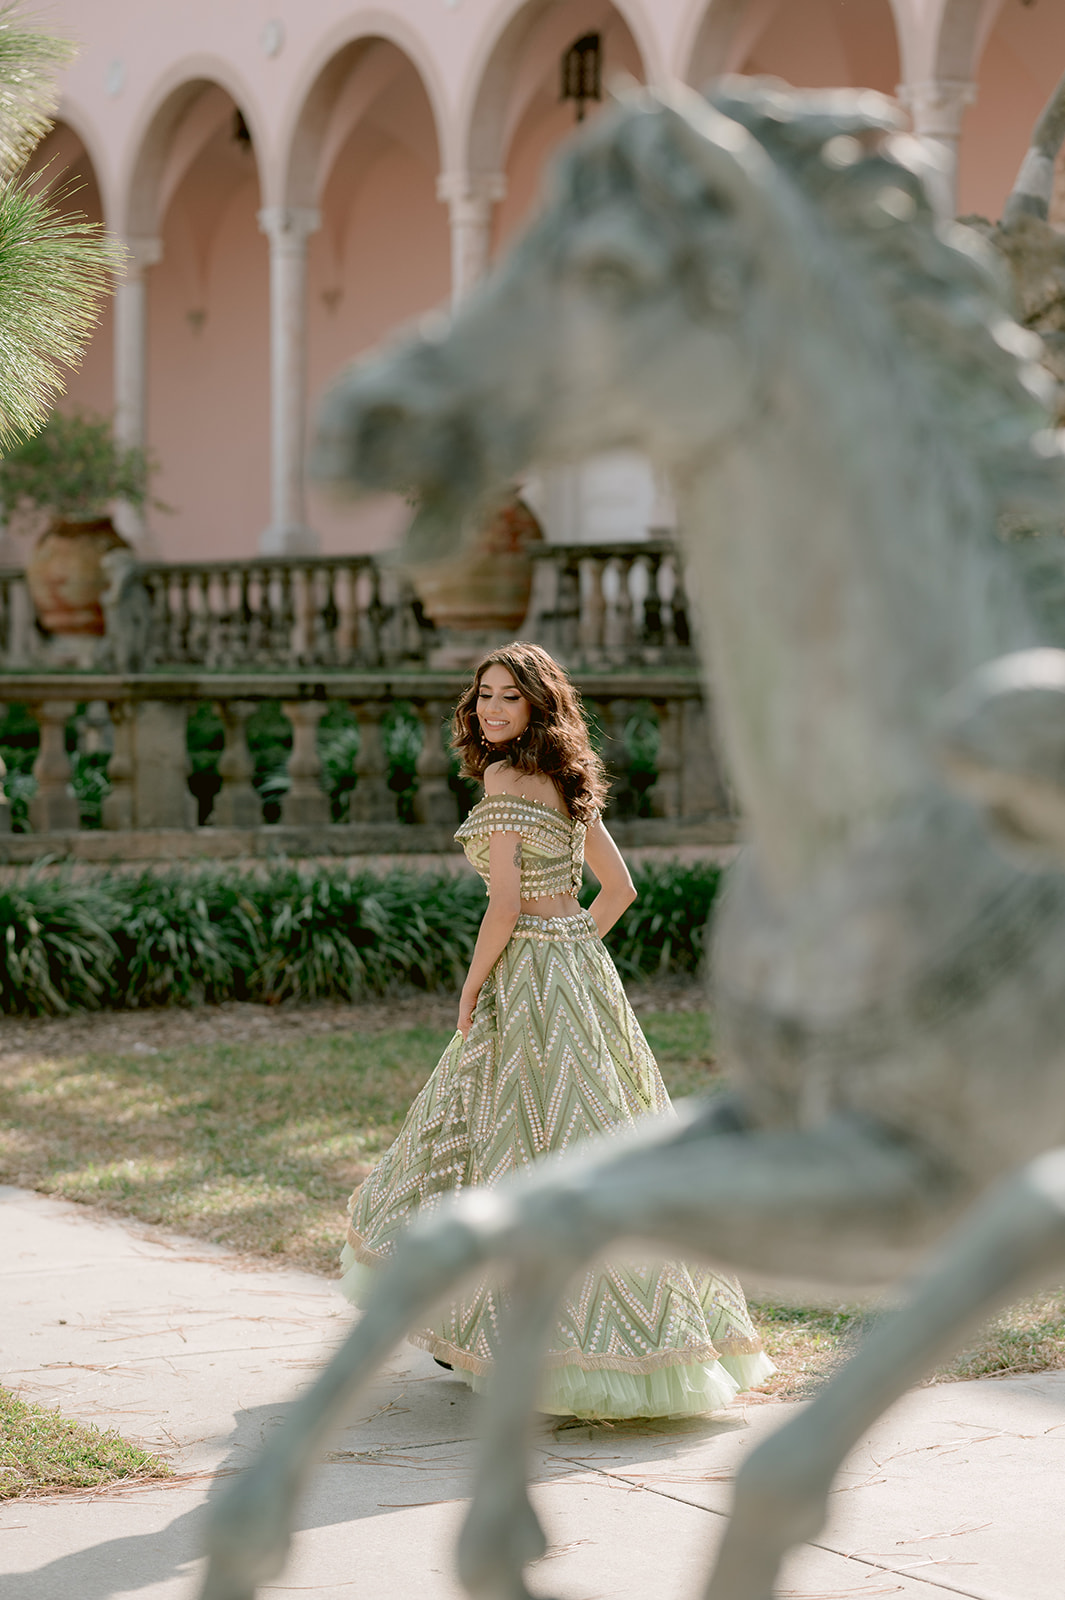 "Indian engagement session with stunning pastel green and gold outfit and Ca' d'Zan mansion"
